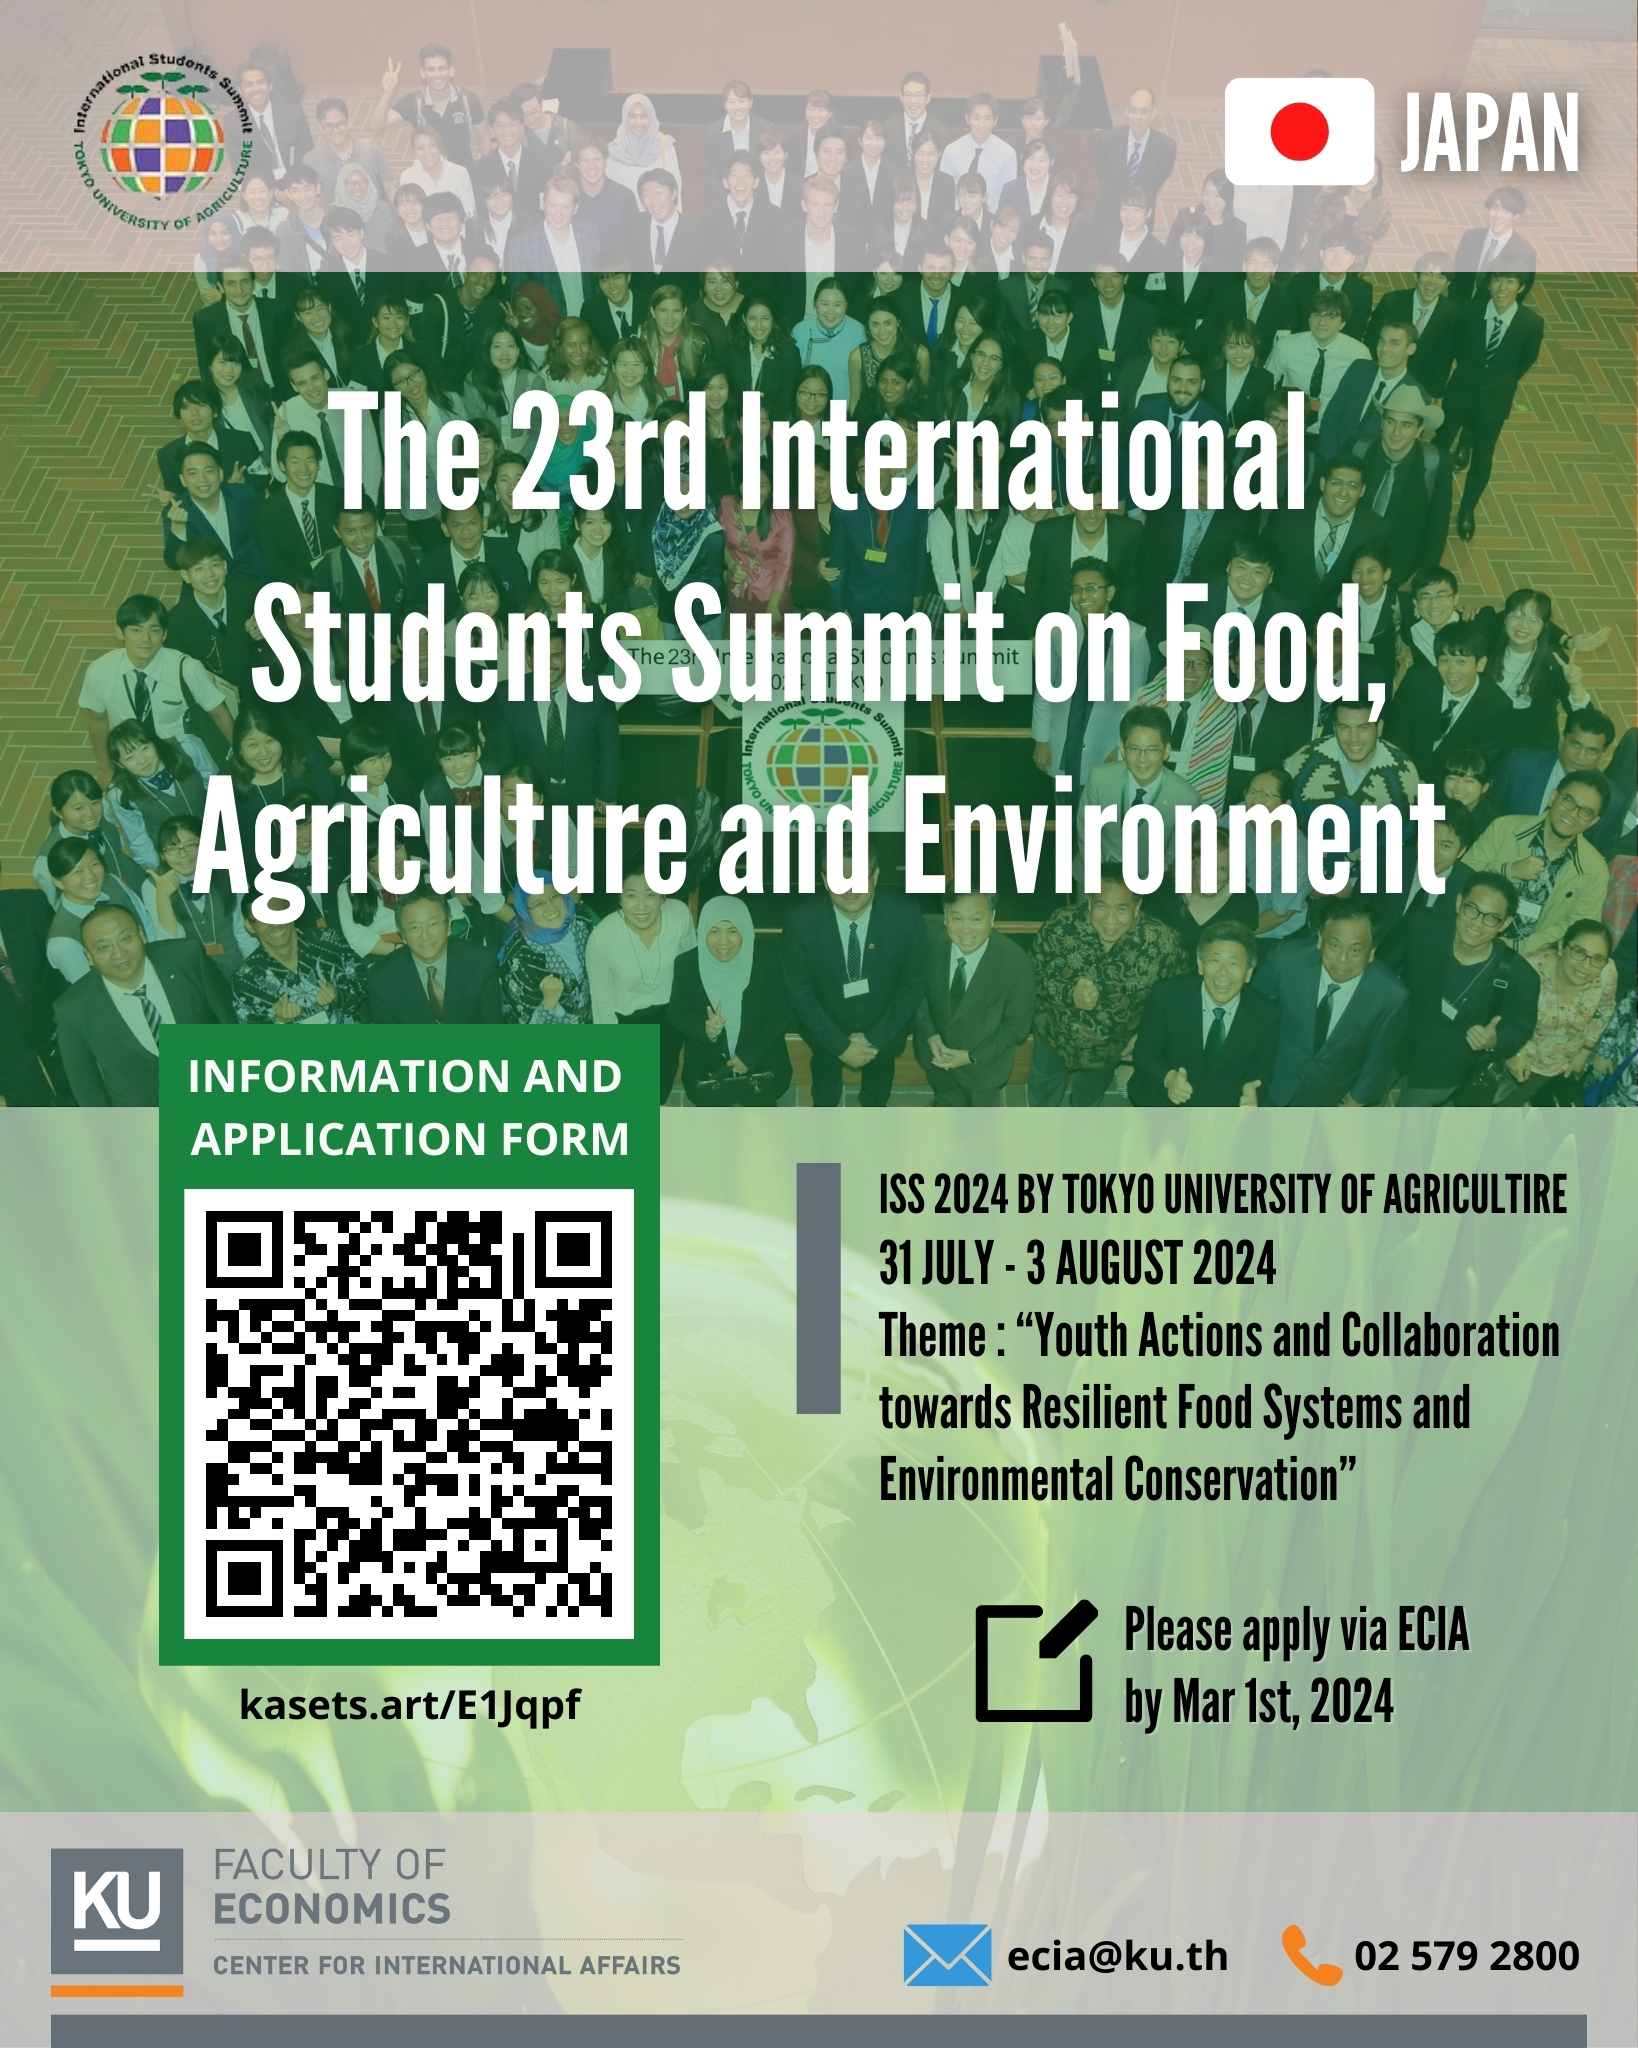 The 23rd International Students Summit on Food, Agriculture and Environment (ISS 2024) by Tokyo University of Agriculture, Japan